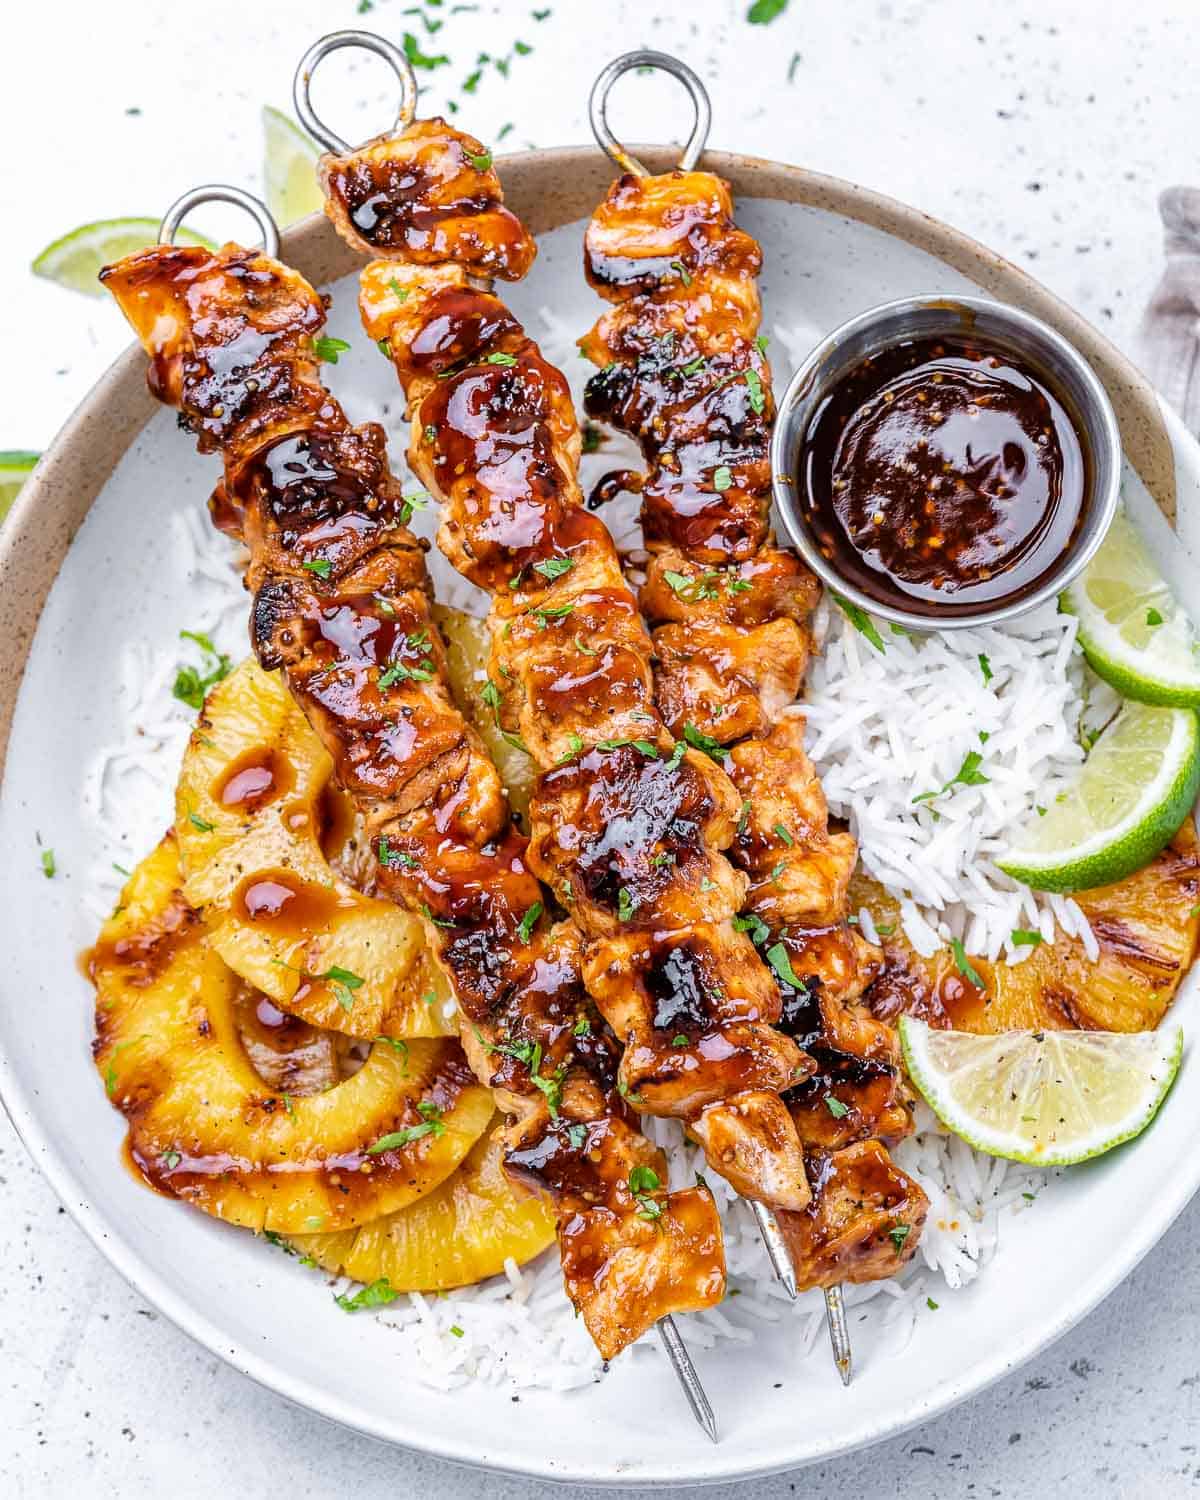 top view 3 chicken skewers with grilled pineapple and rice